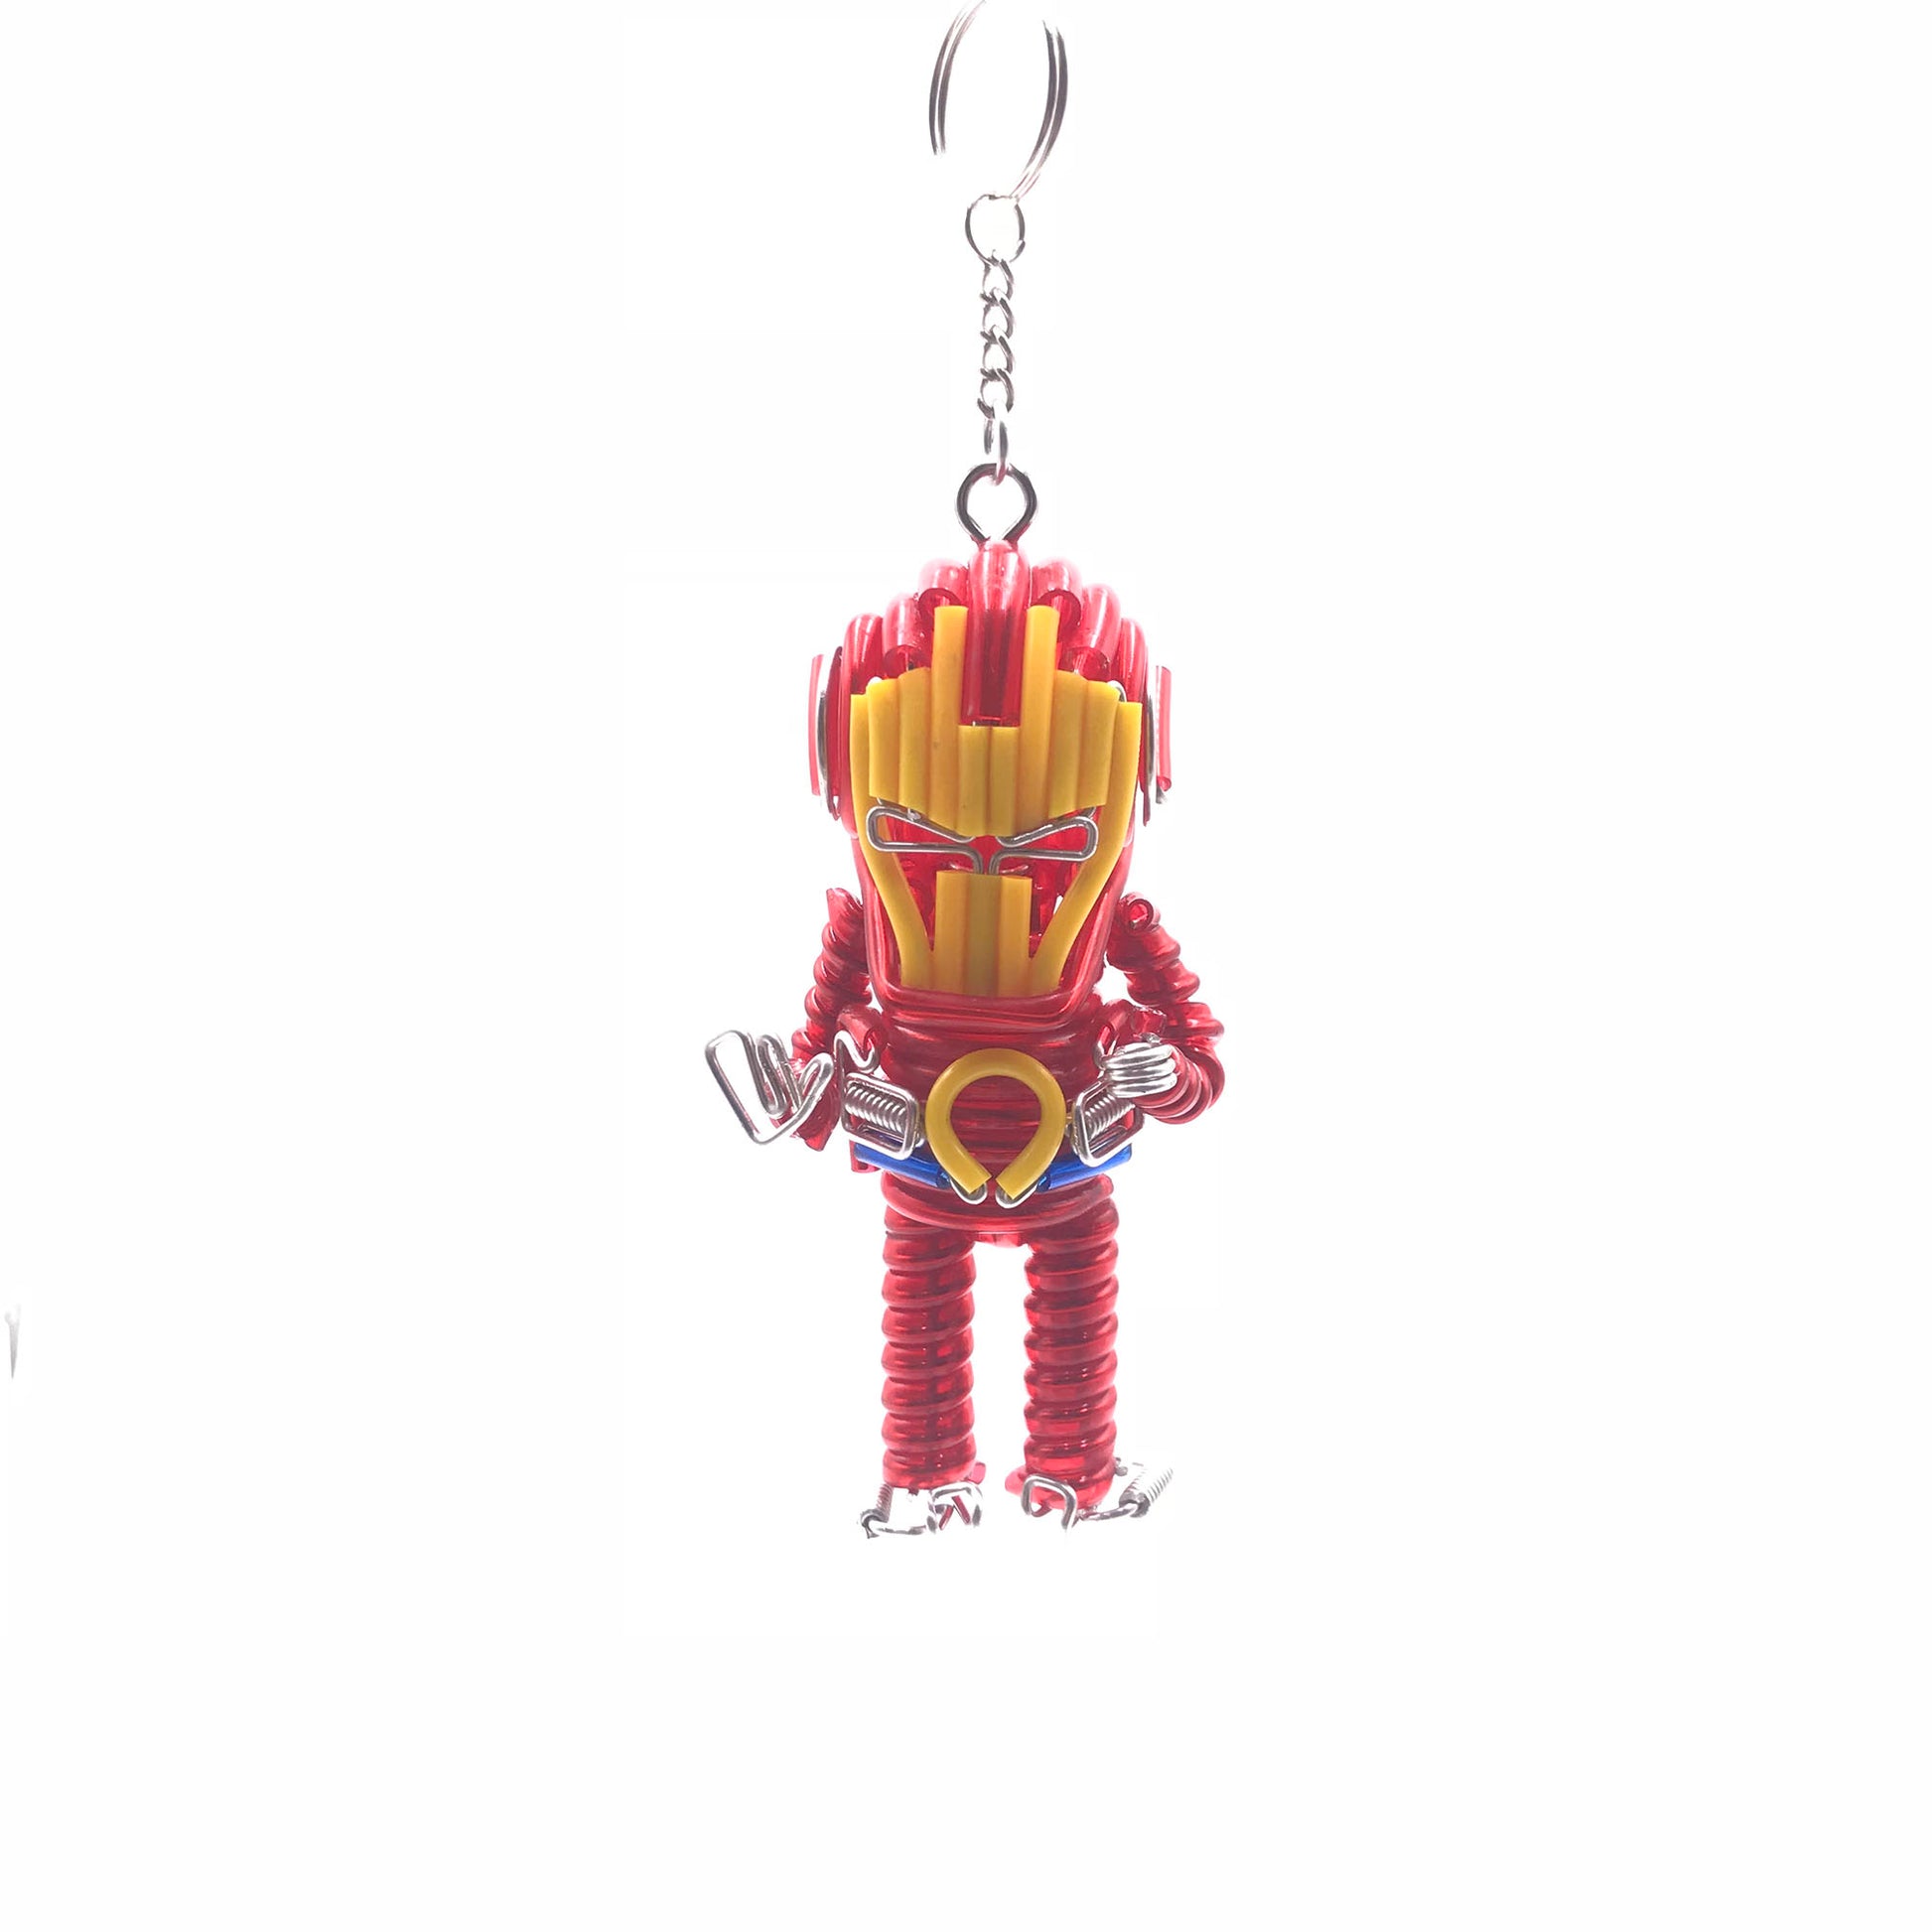 Miniature Wire Art Iron man Keychain hand-crafted from aluminium wire